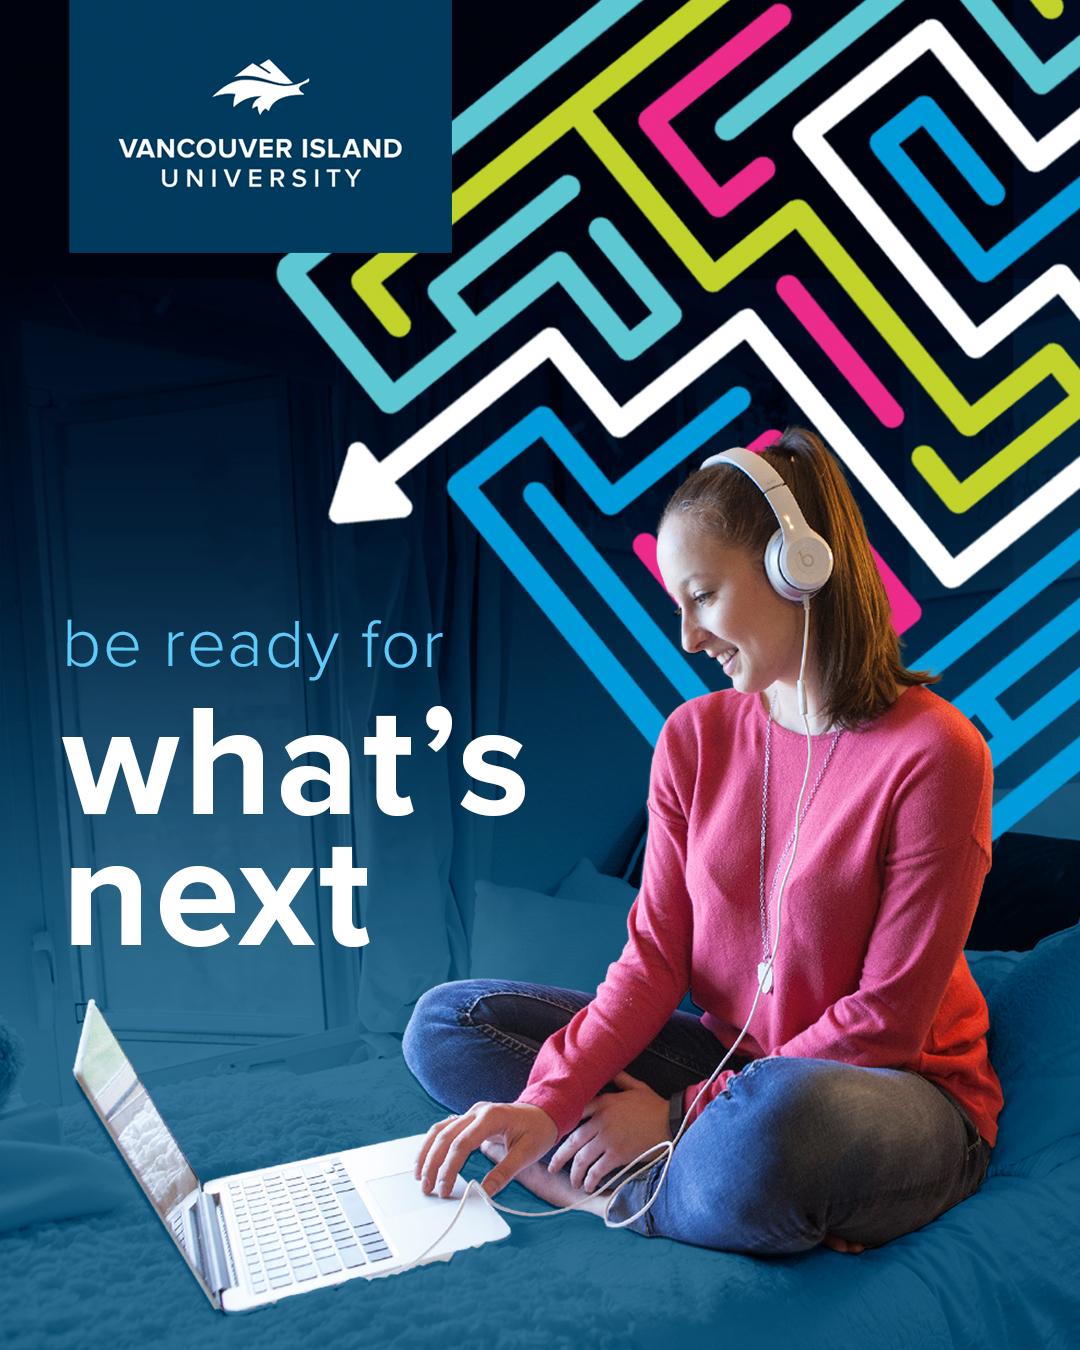 VIU invites future students to have a conversation about how VIU can help them achieve their future goals